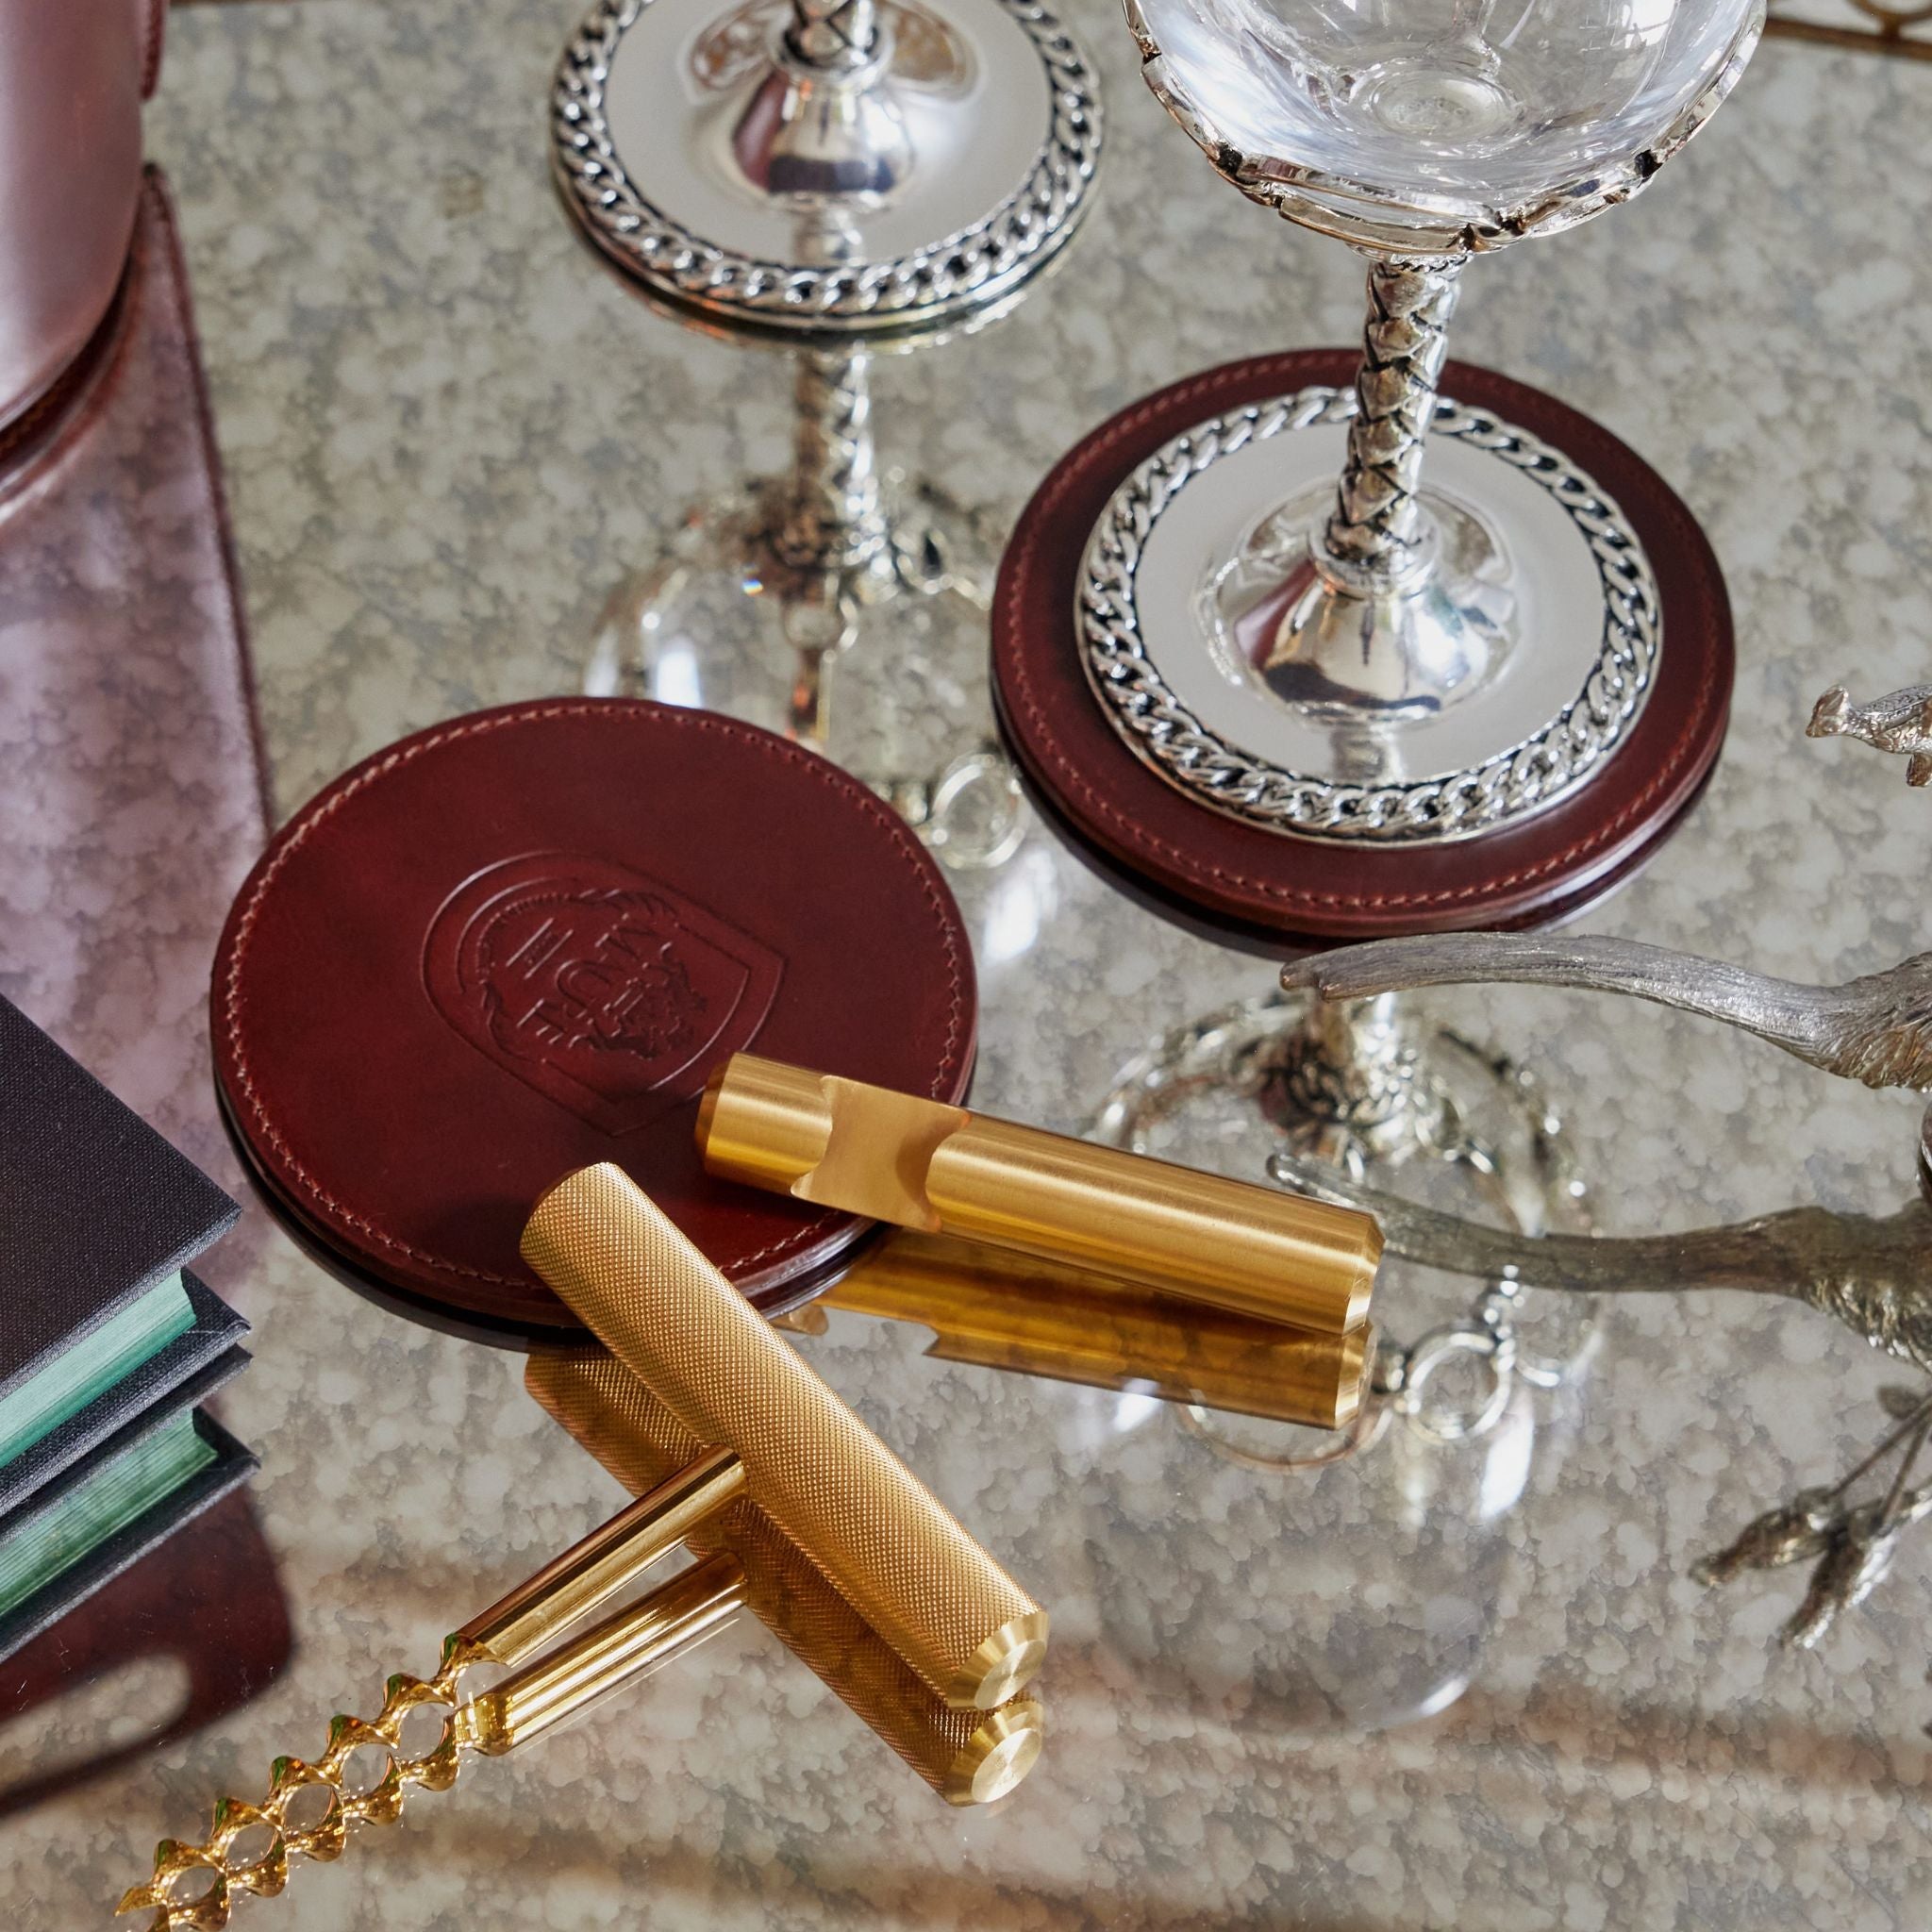 a close up of a table with a wine glass and coasters